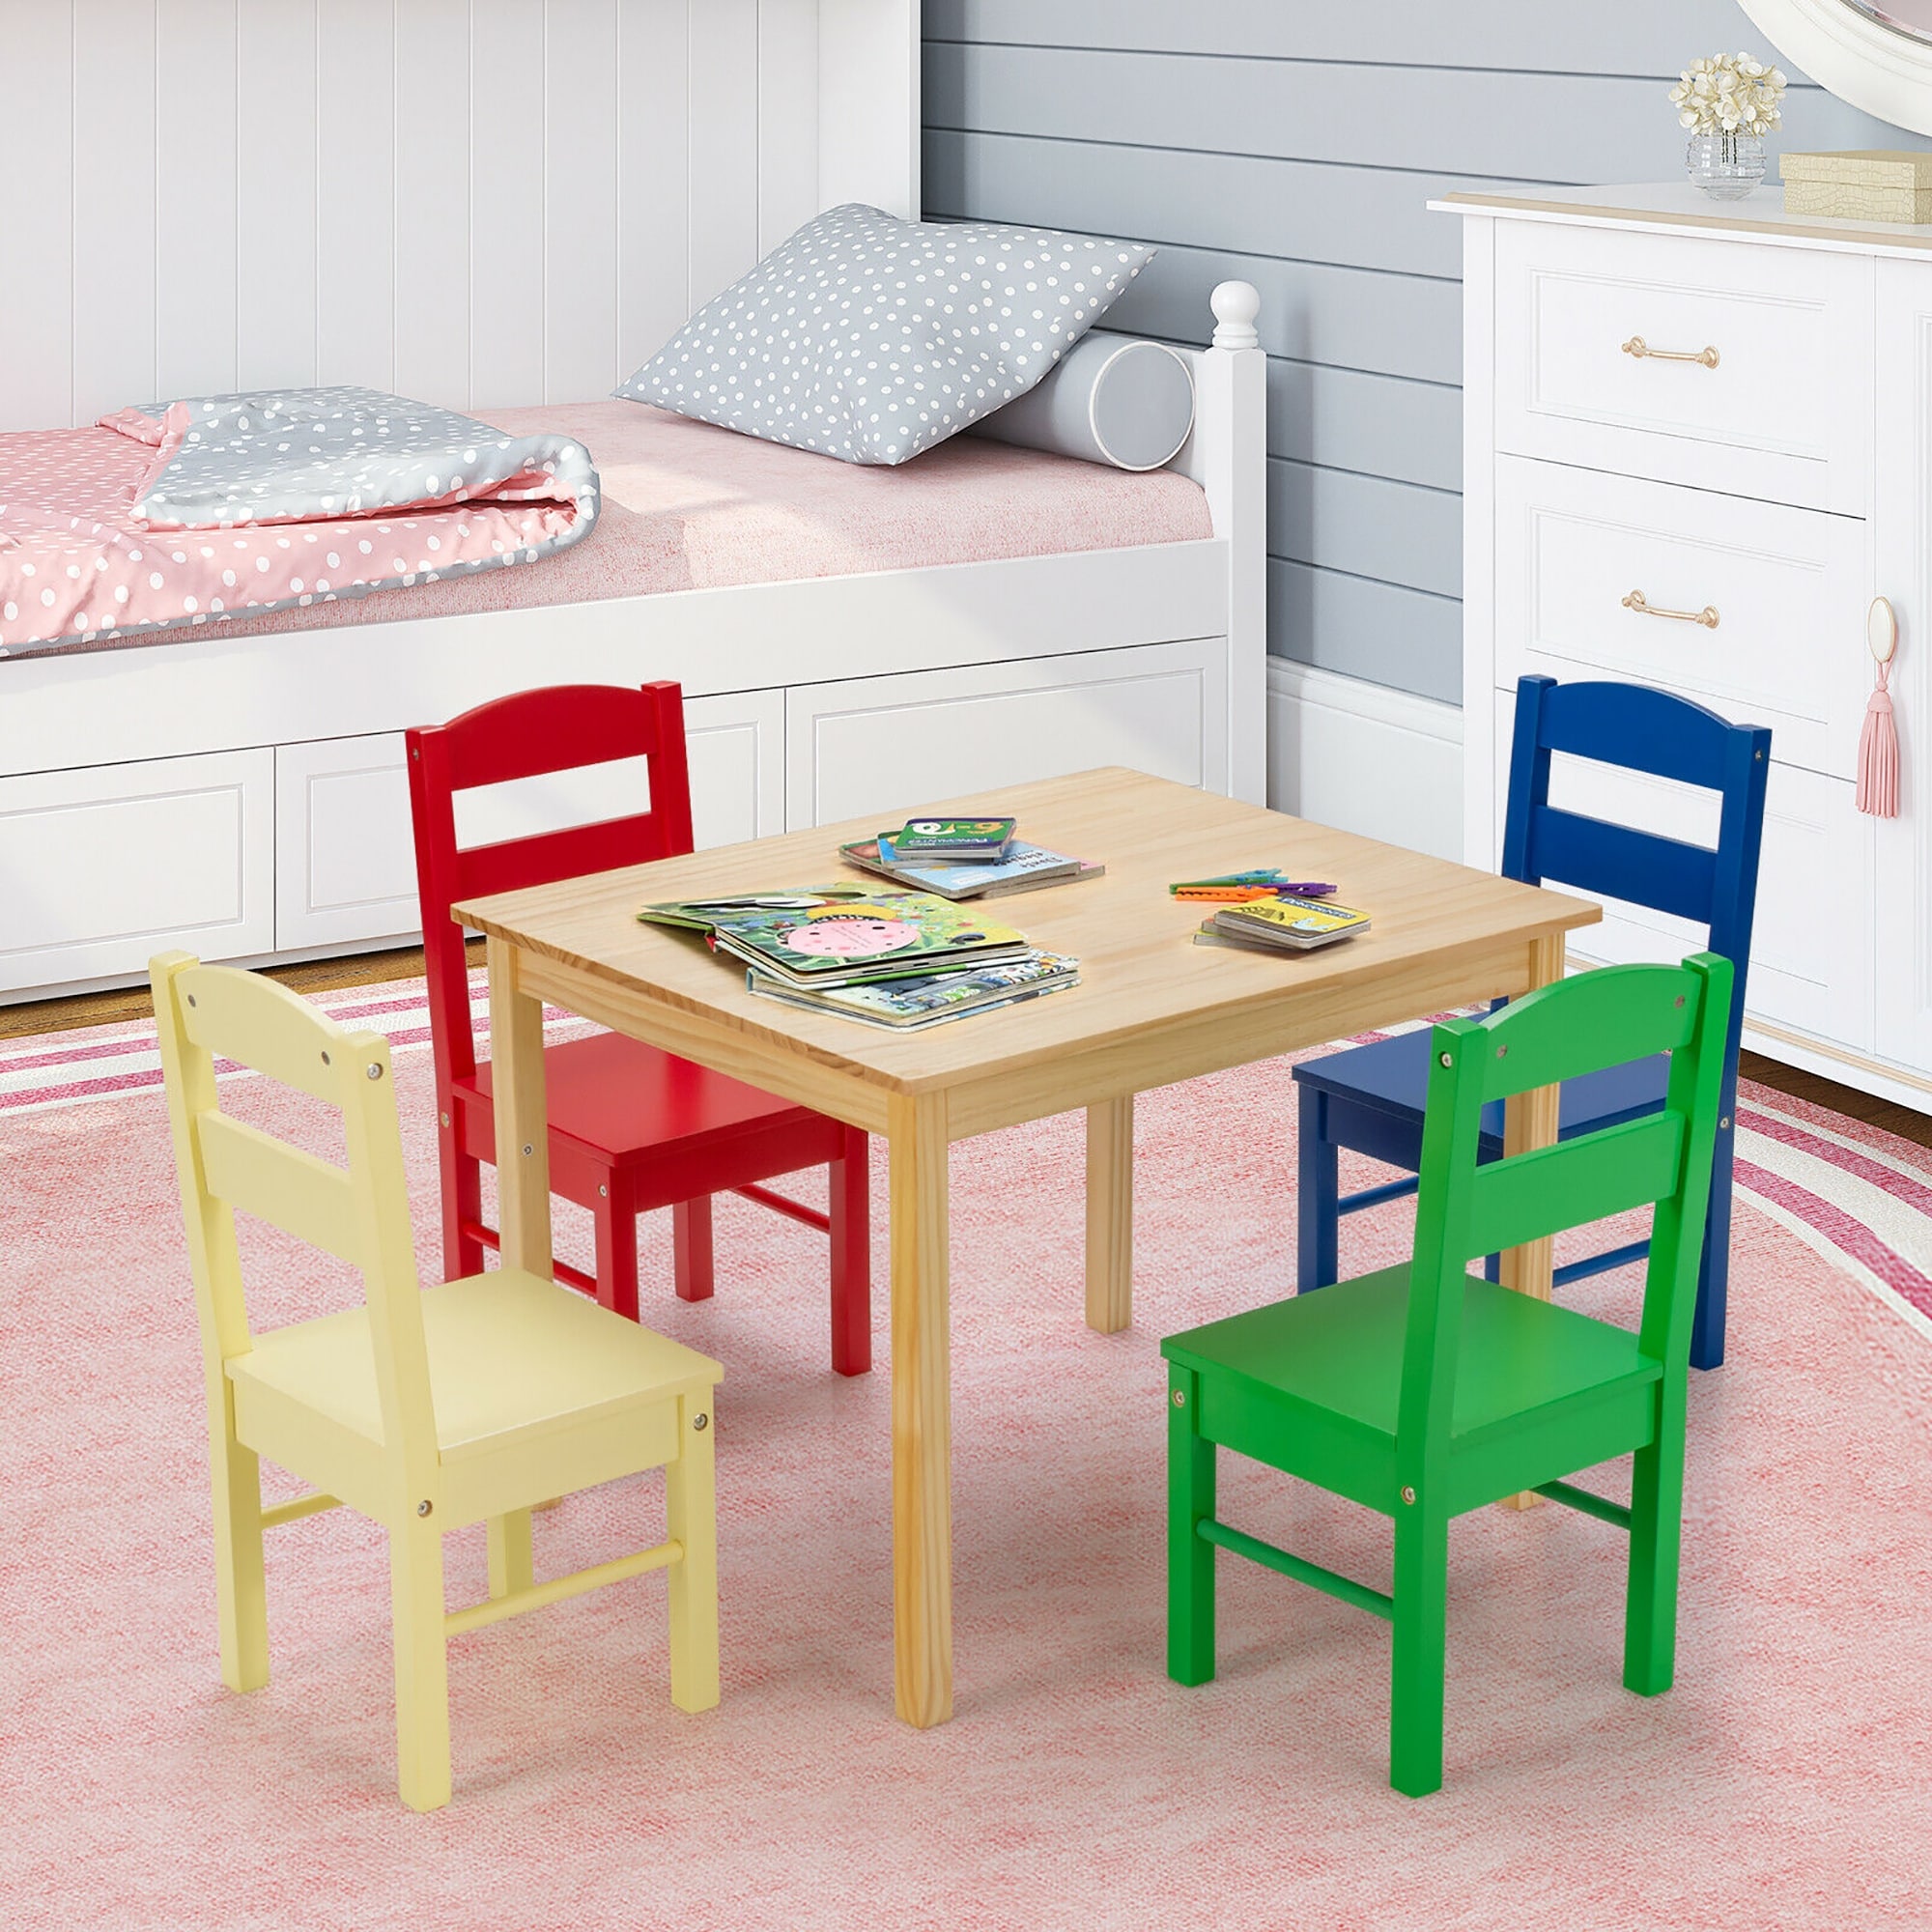 5 Piece Kids Table And Chair Set Junior Furniture Dining Playing Learning 